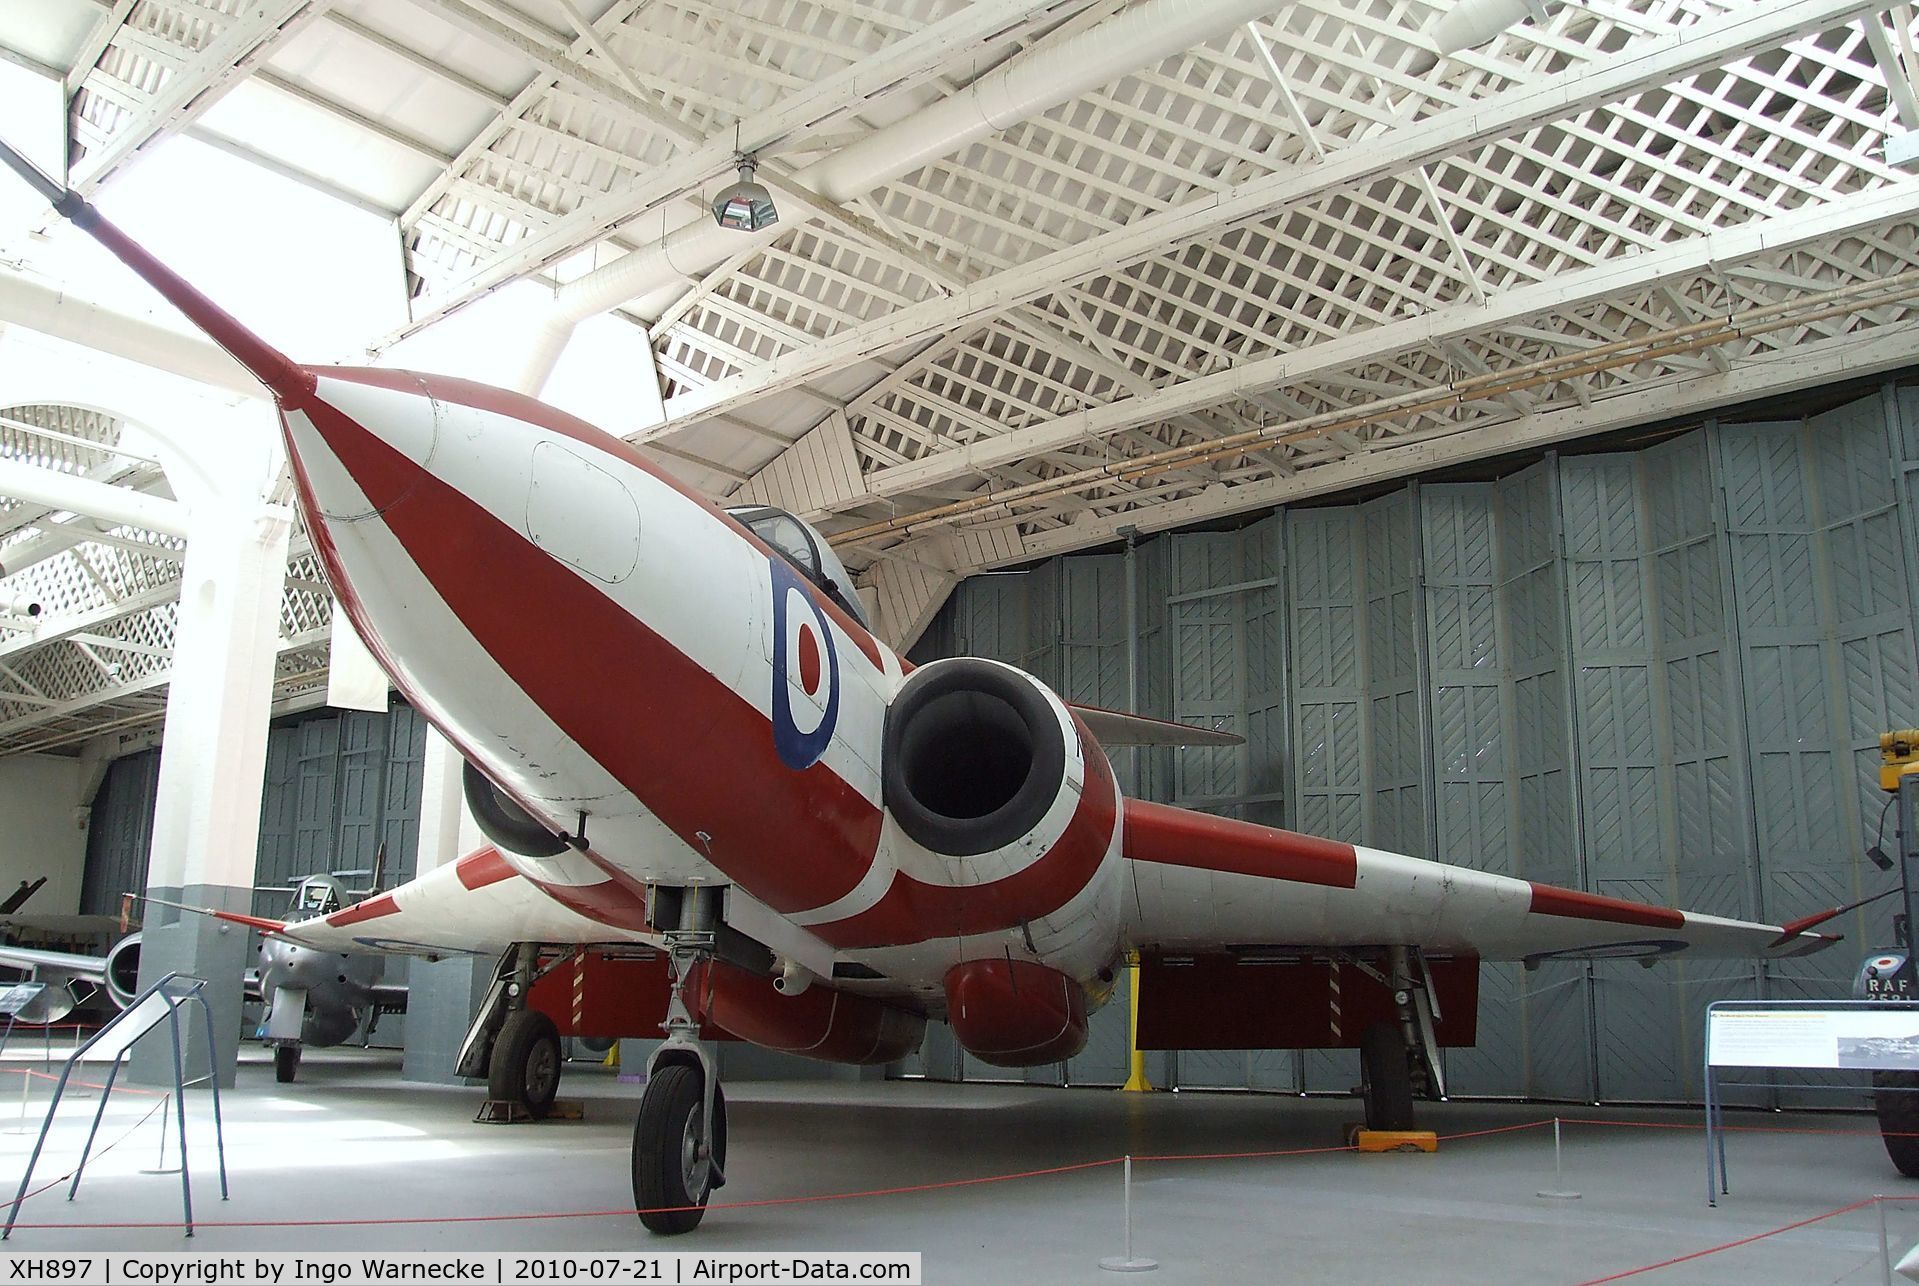 XH897, 1958 Gloster Javelin FAW.9 C/N Not found XH897, Gloster Javelin FAW9 at the Imperial War Museum, Duxford